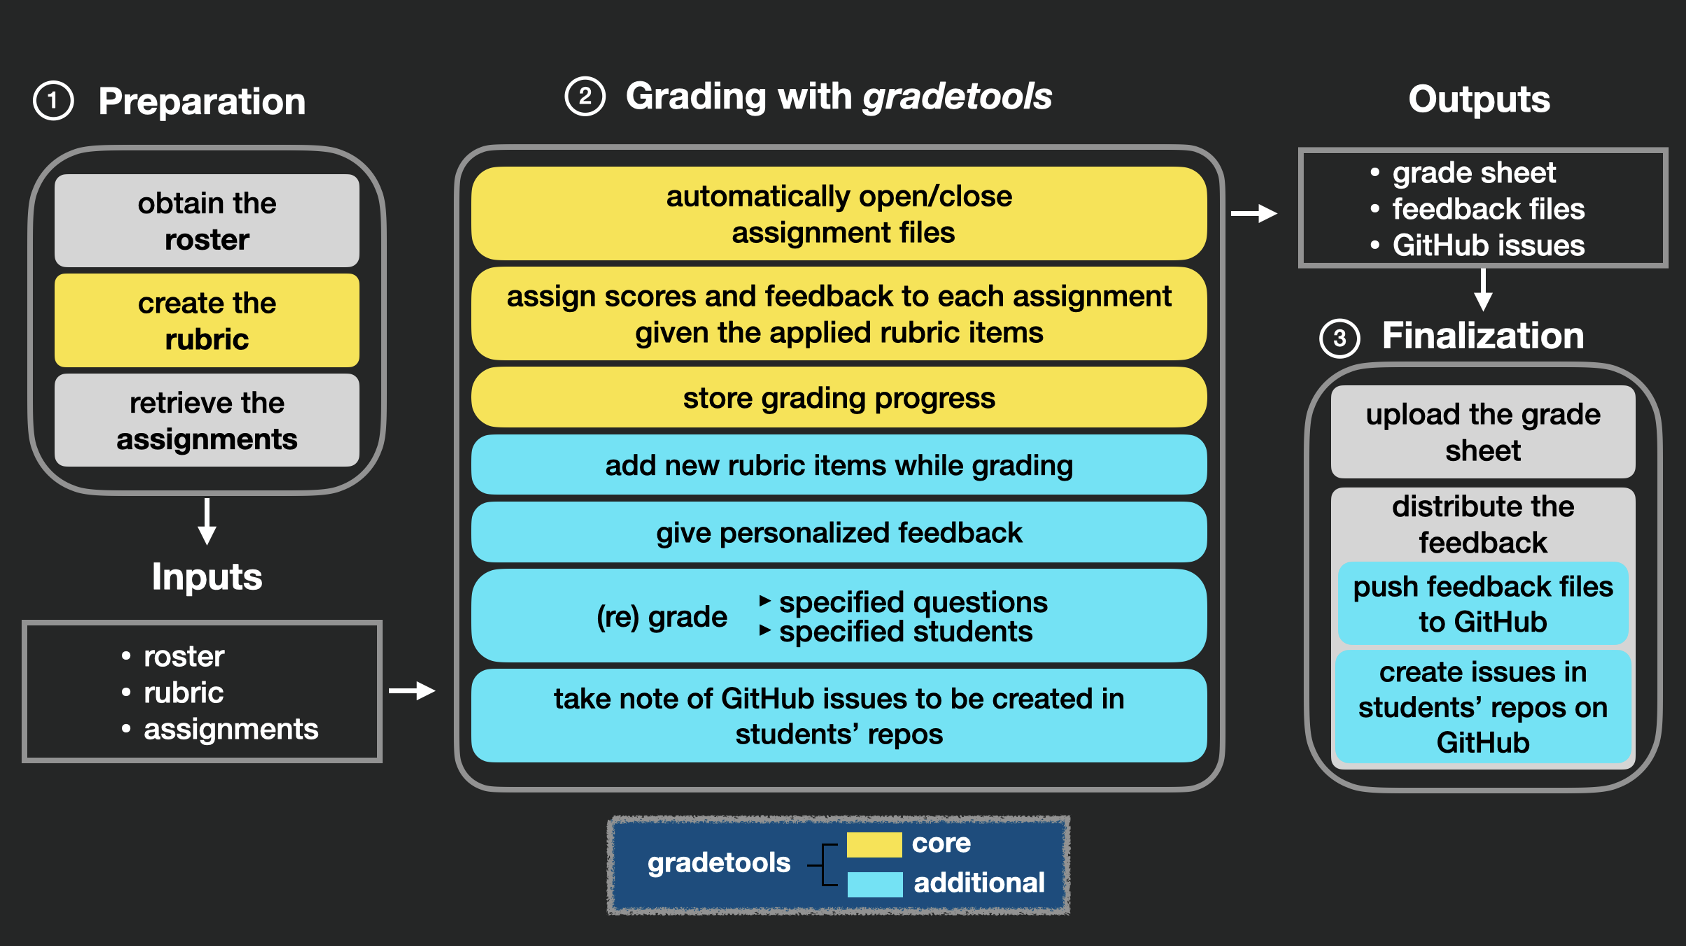 An overview of the grading process using gradetools